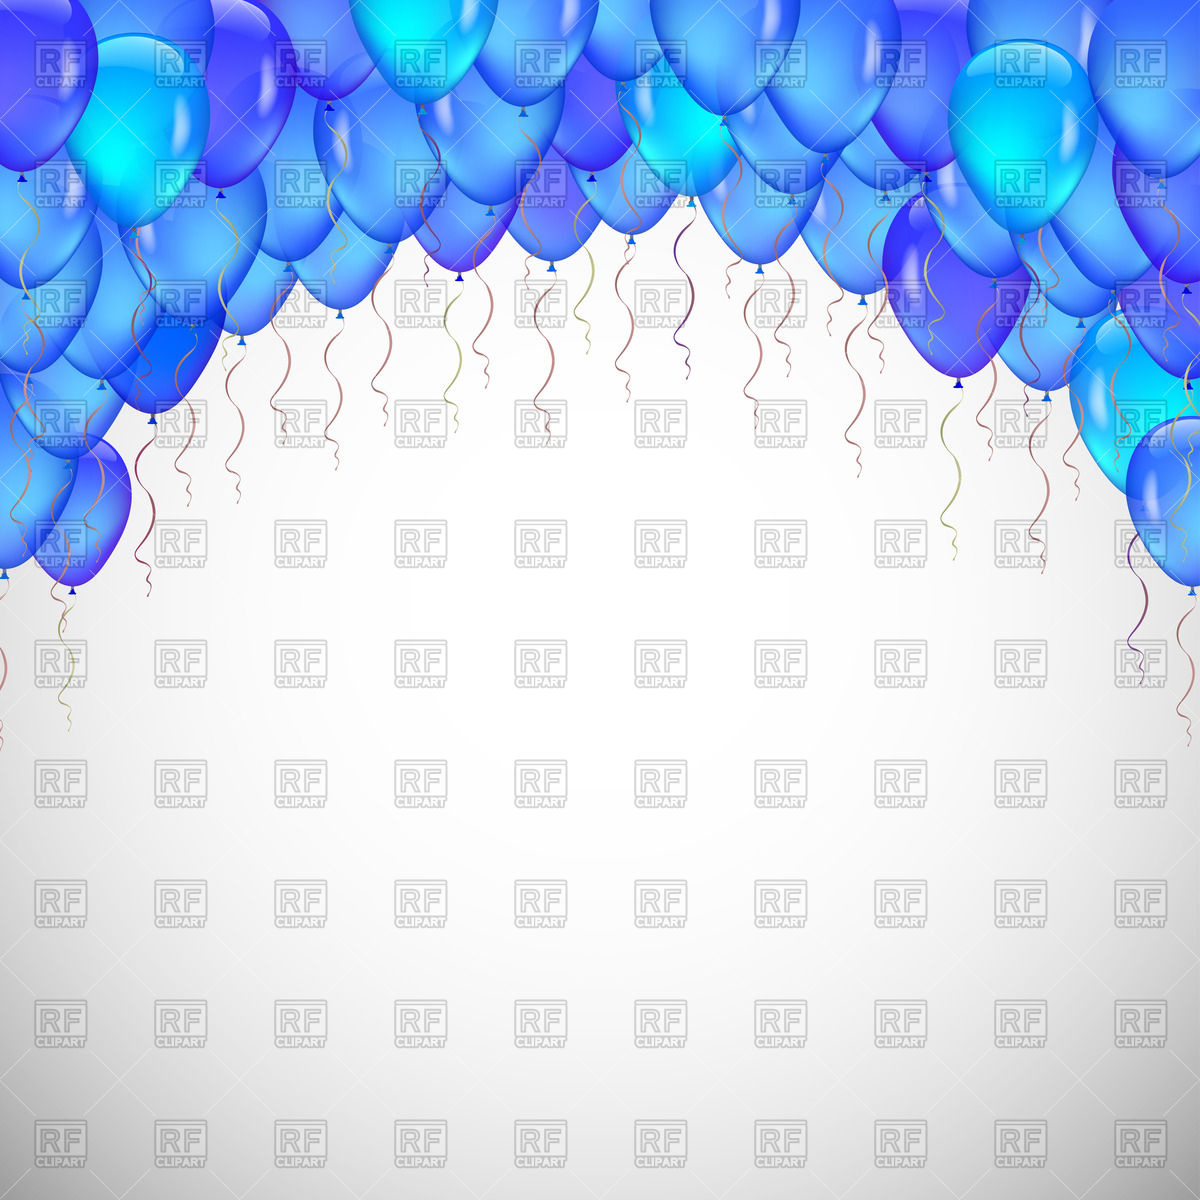 Blue Background with Balloons